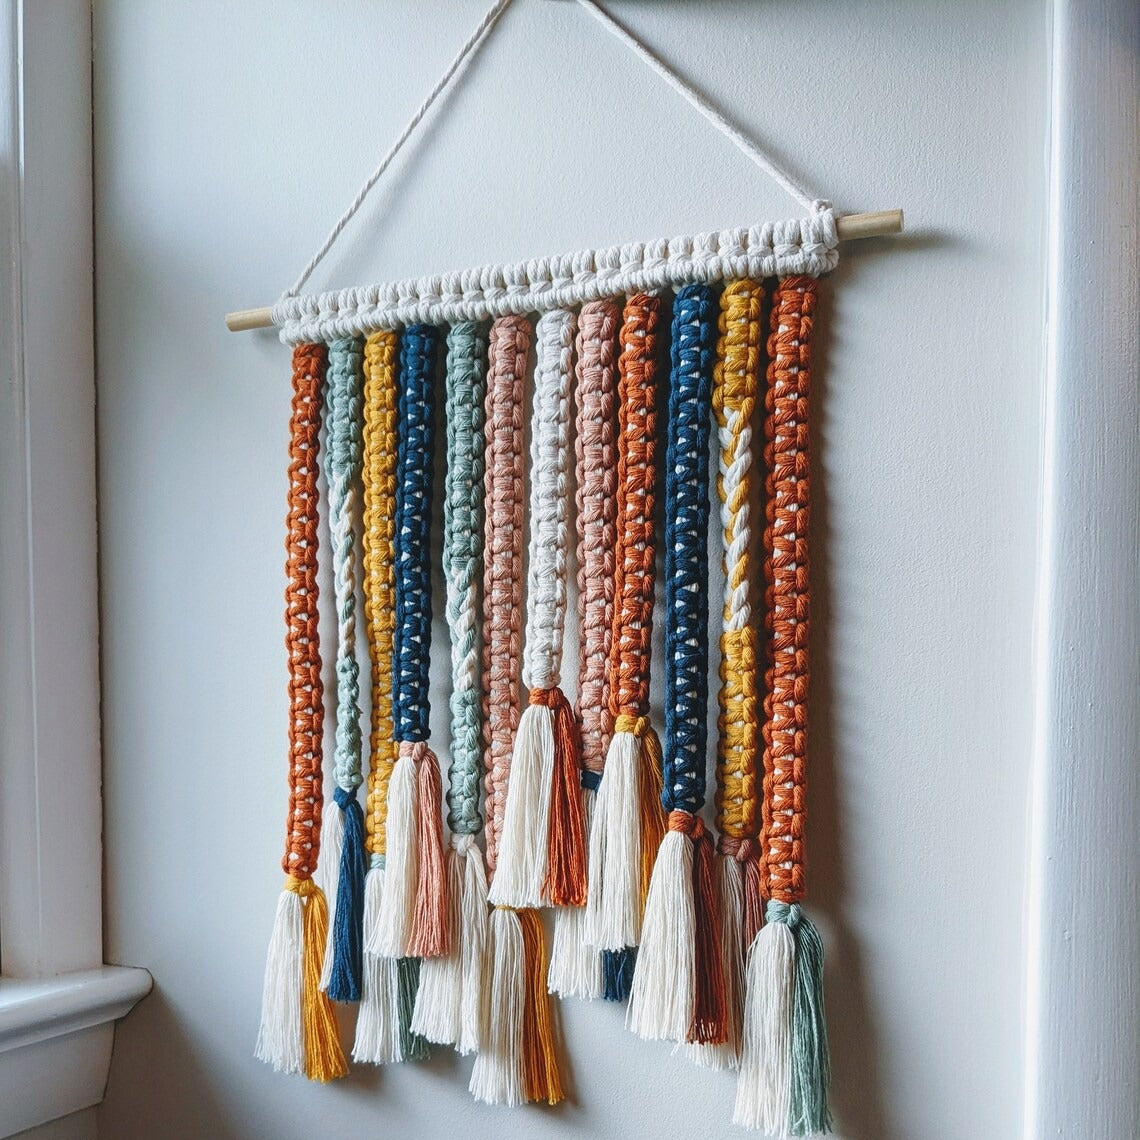 Spectrum Serenity Colorful Macrame Wall